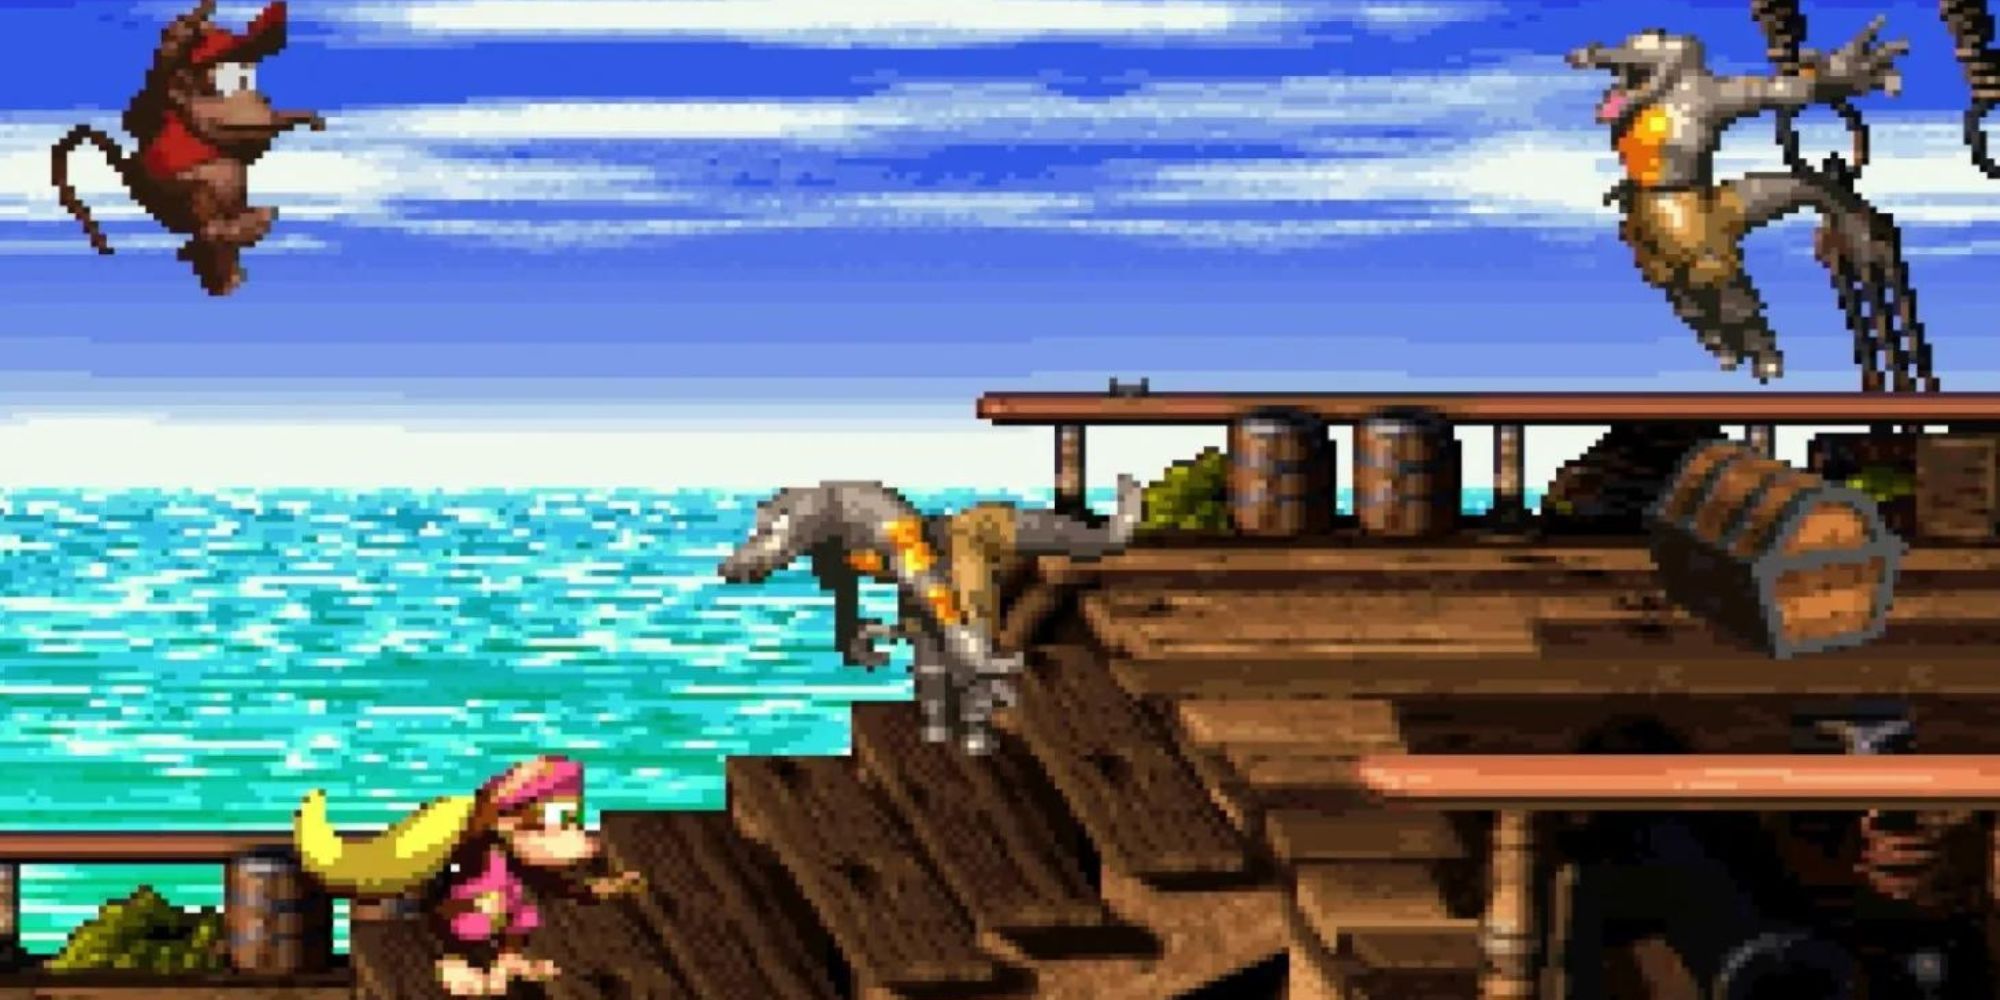 Diddy and Dixie Kong attack enemies on a ship